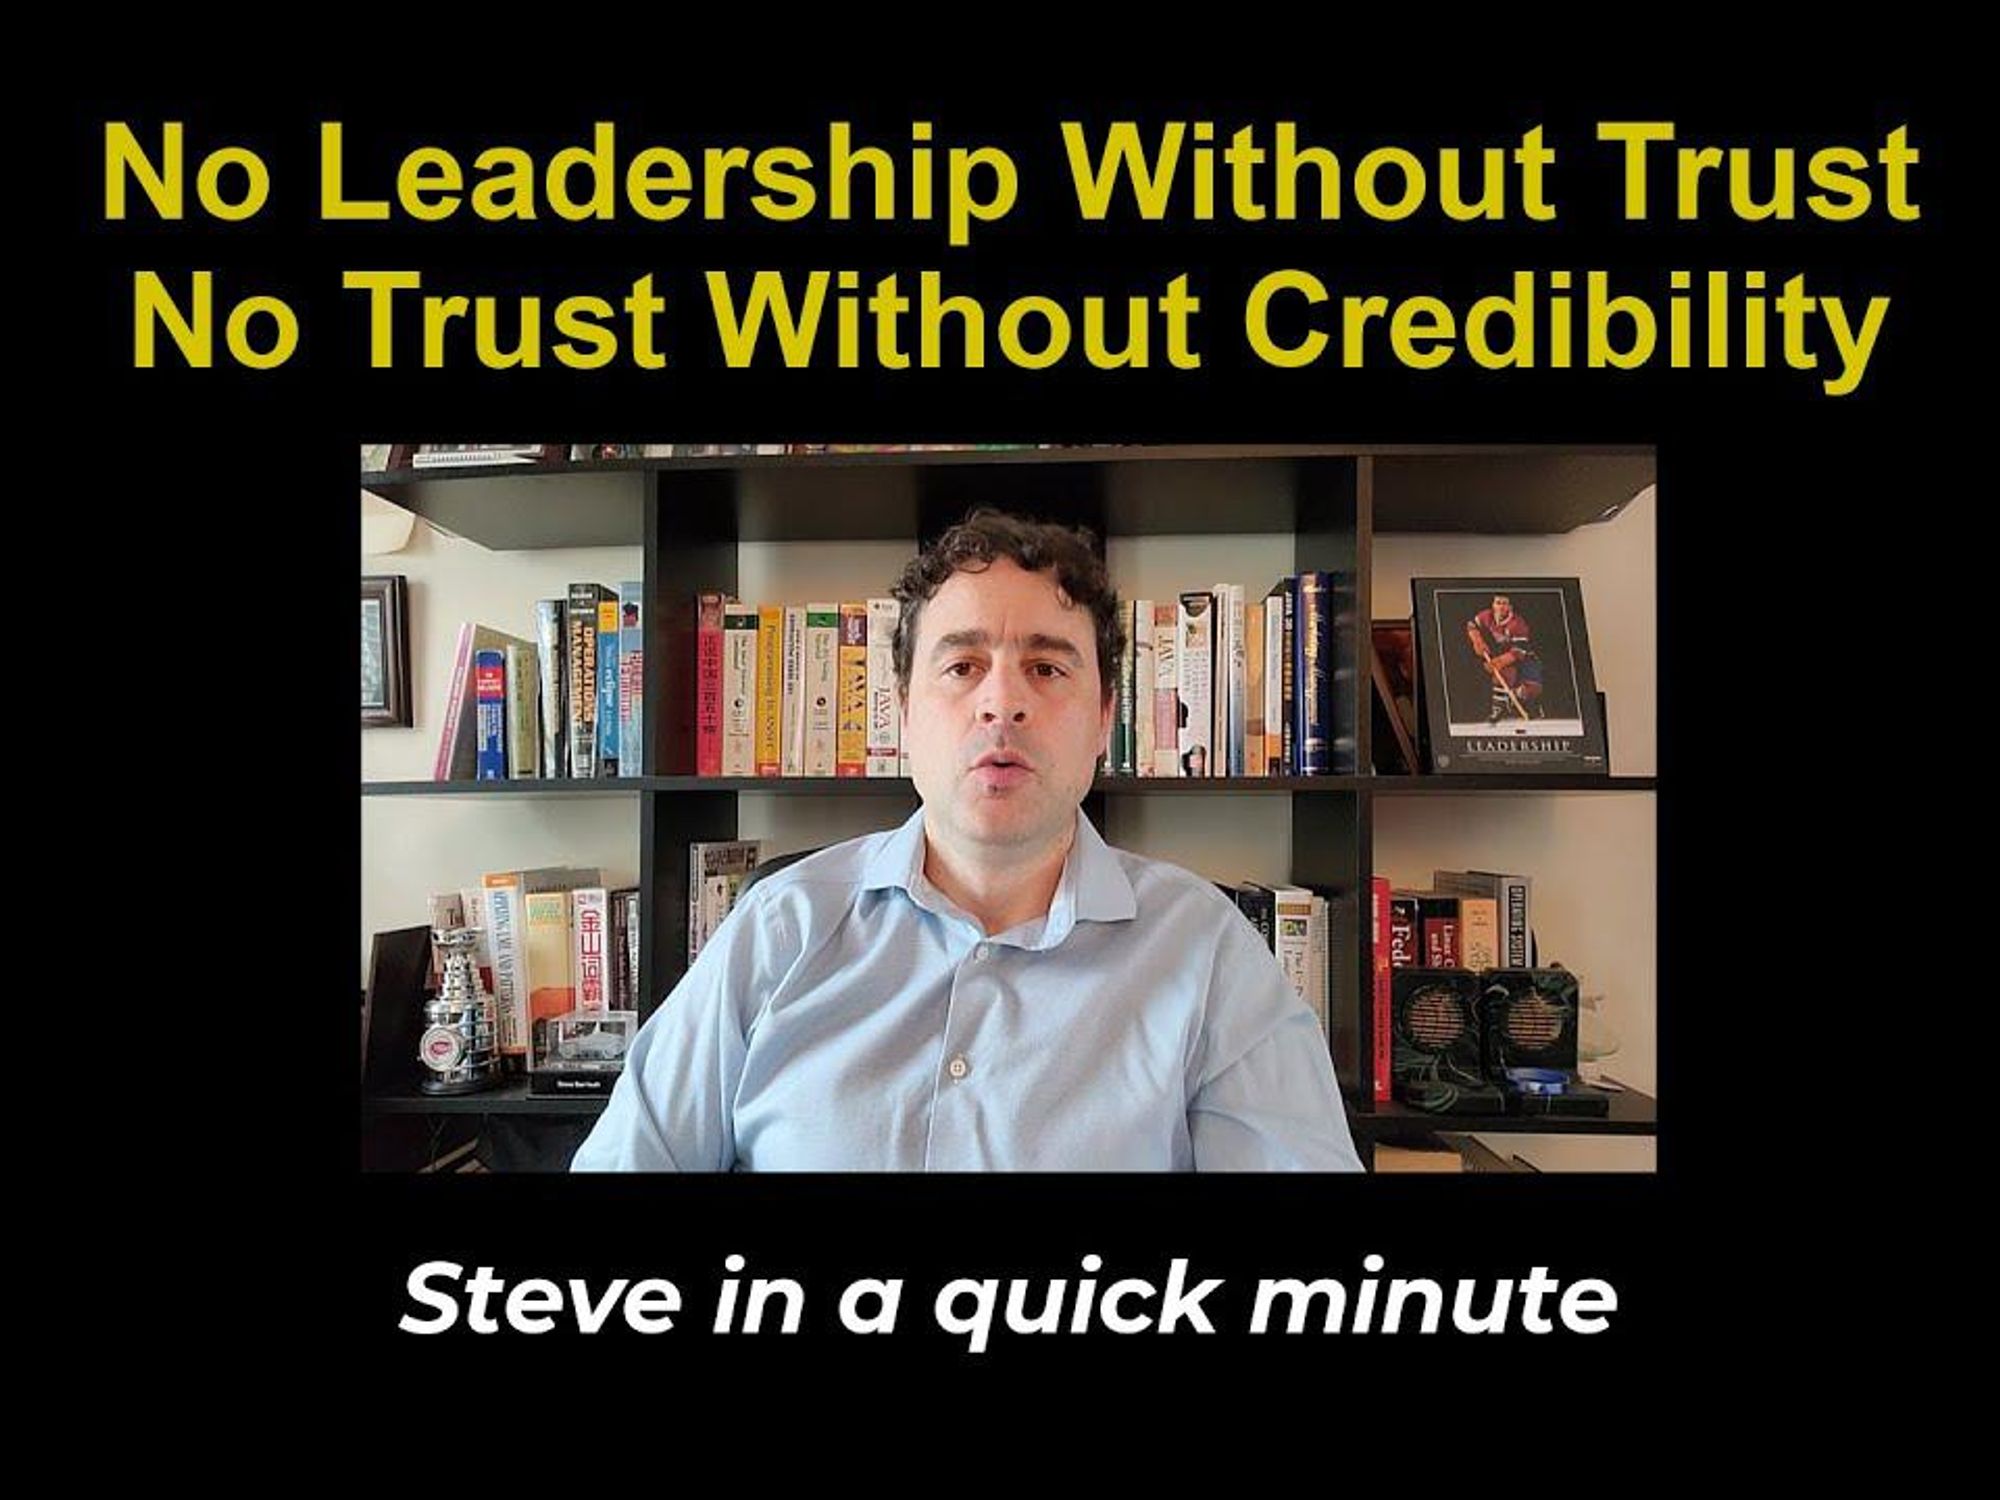 To A Leader, Trust & Credibility Are As Necessary As Food And Water